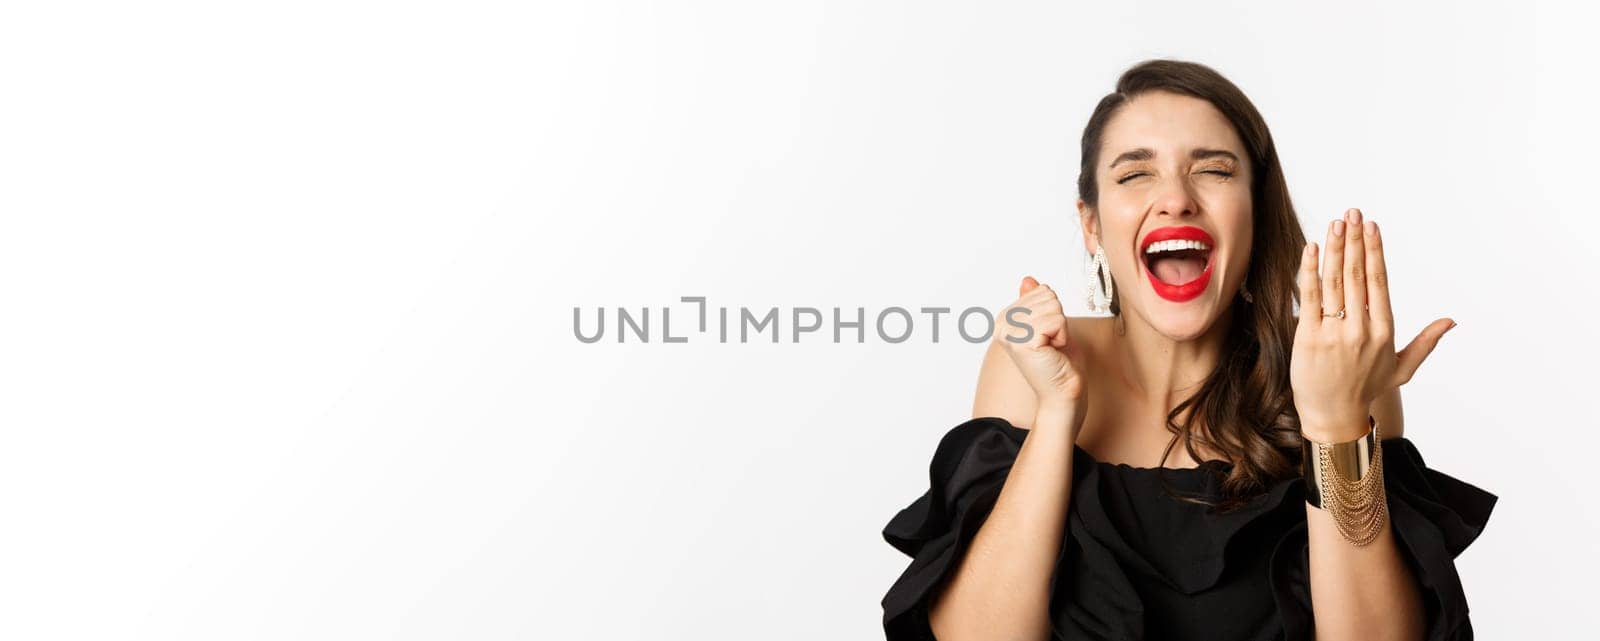 Fashion and beauty concept. Excited and happy woman said yes, showing hand with engagement ring and shouting joyful, become bride, standing over white background.